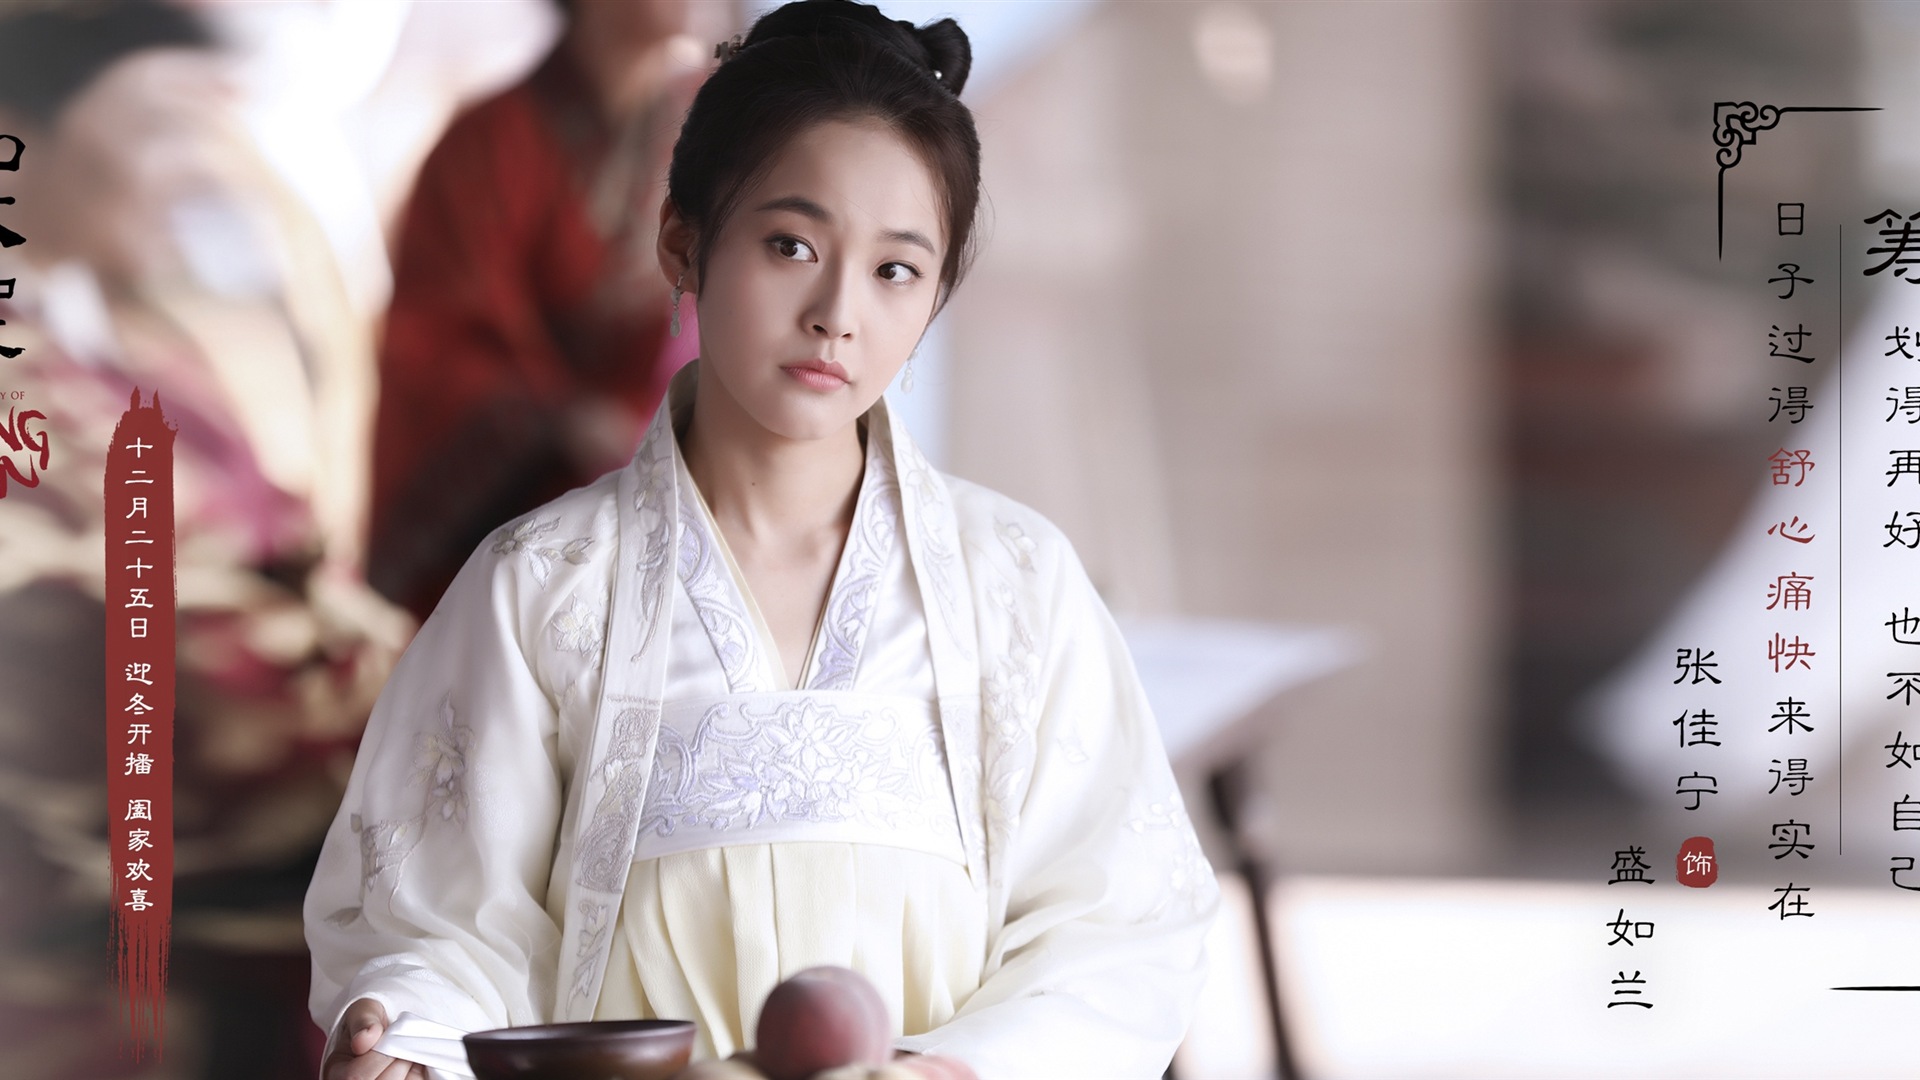 The Story Of MingLan, TV series HD wallpapers #33 - 1920x1080